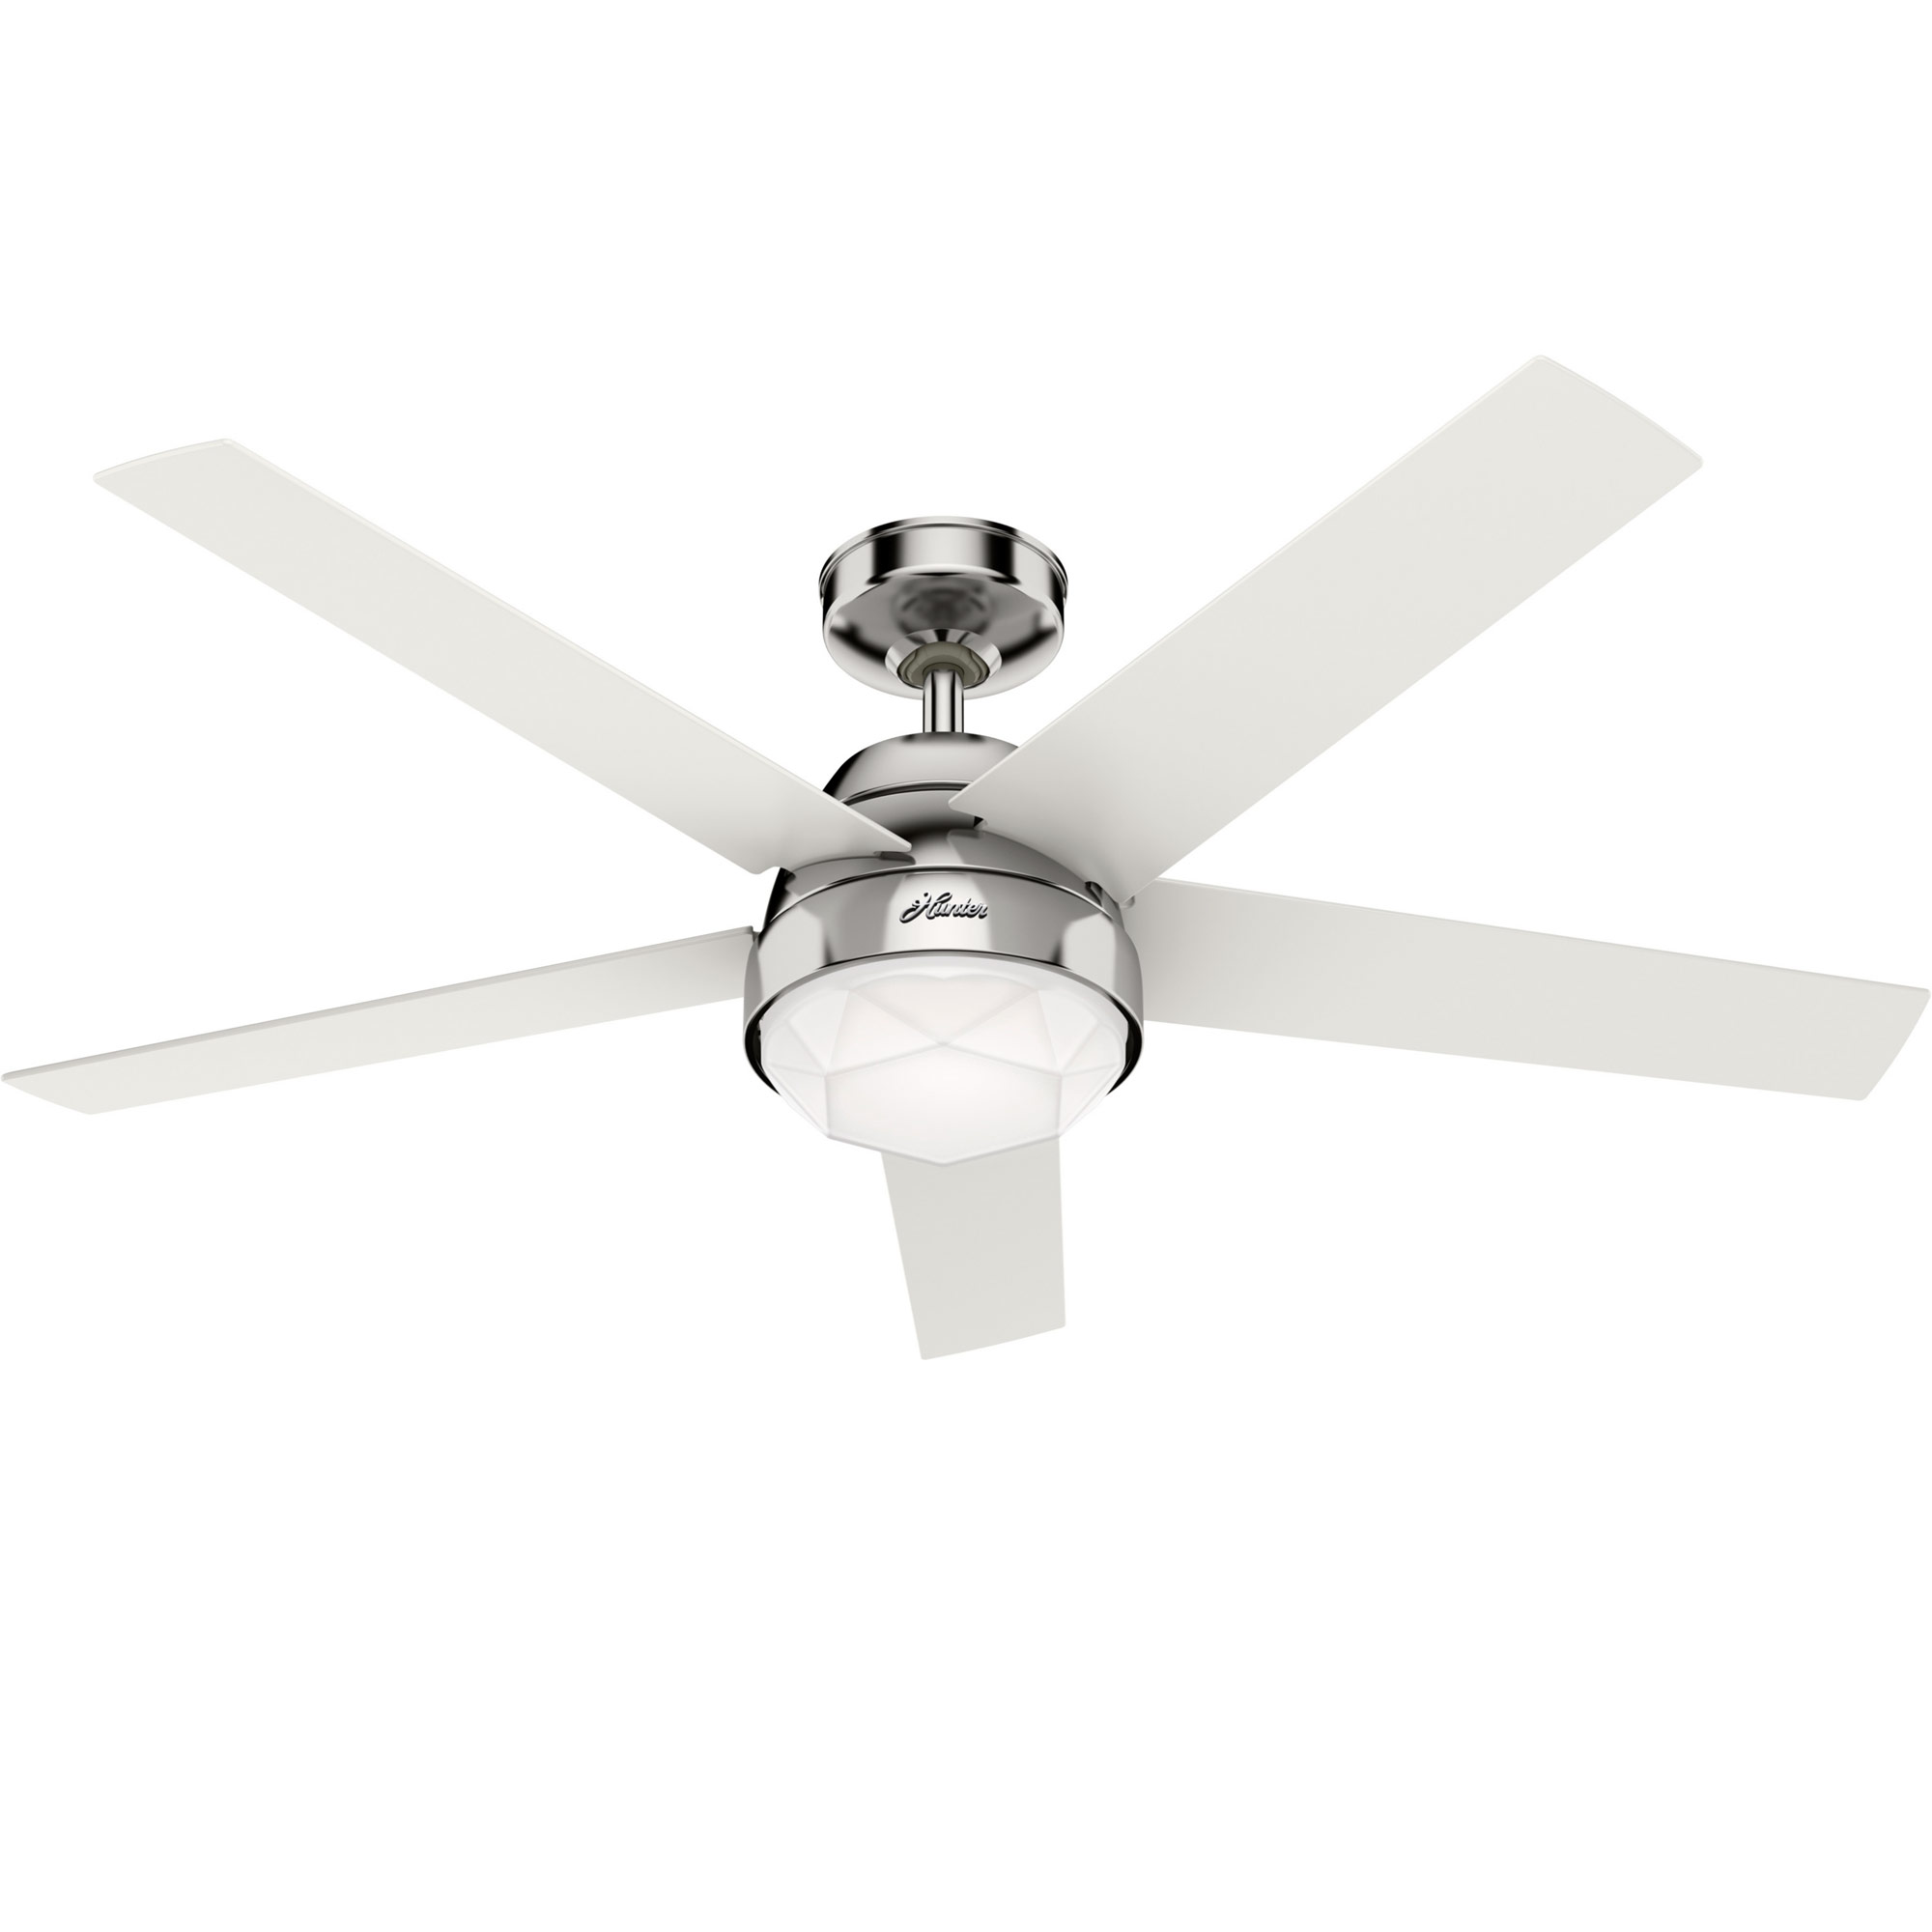 Garland Ceiling Fan With Light By